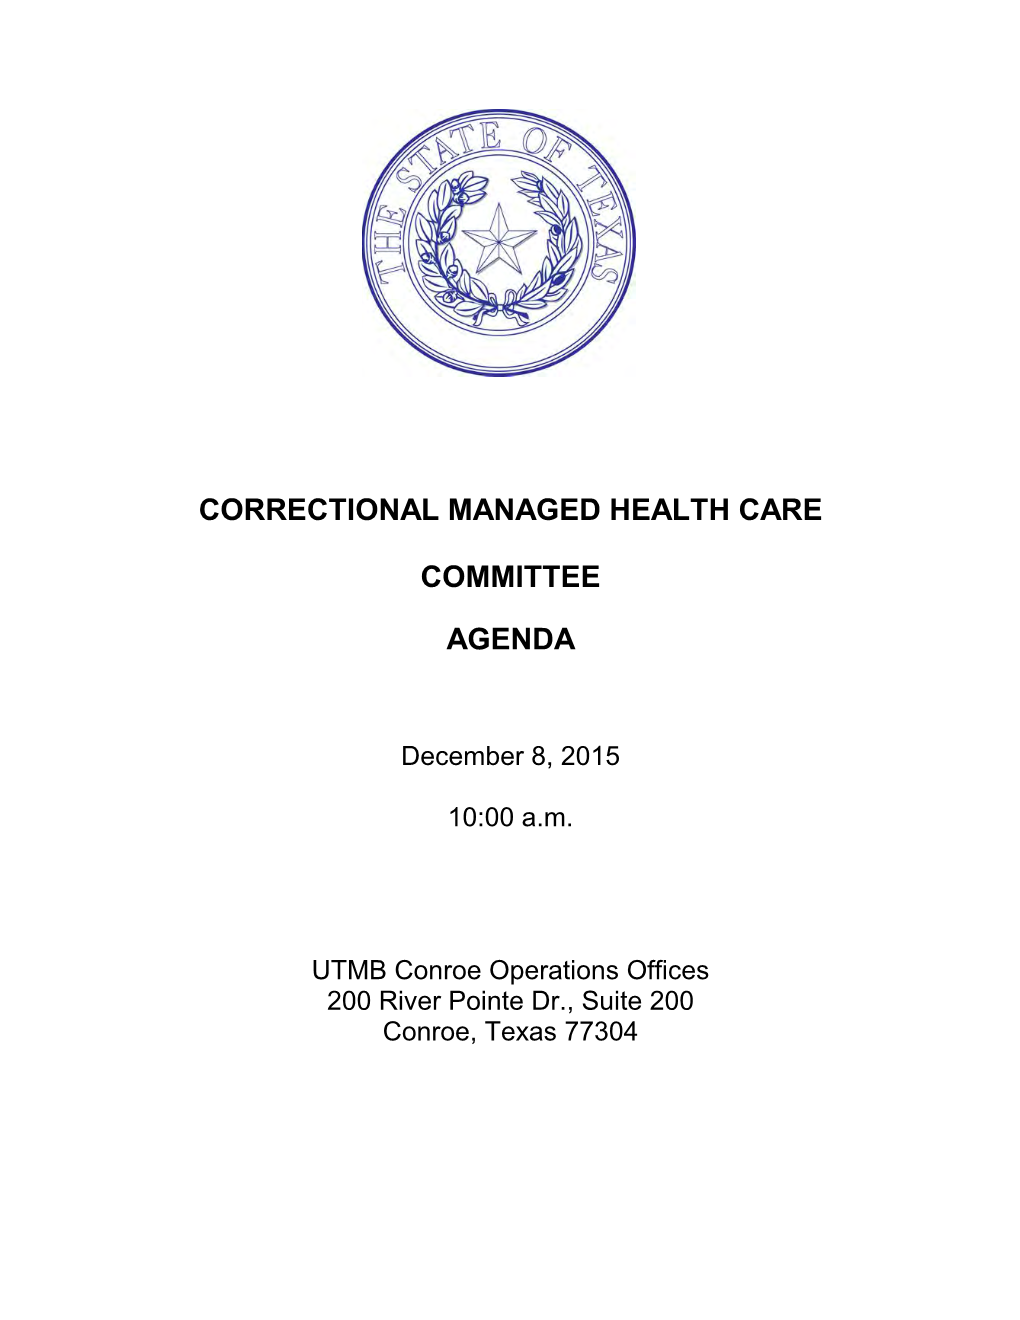 CORRECTIONAL MANAGED HEALTH CARE COMMITTEE December 8, 2015 10:00 A.M